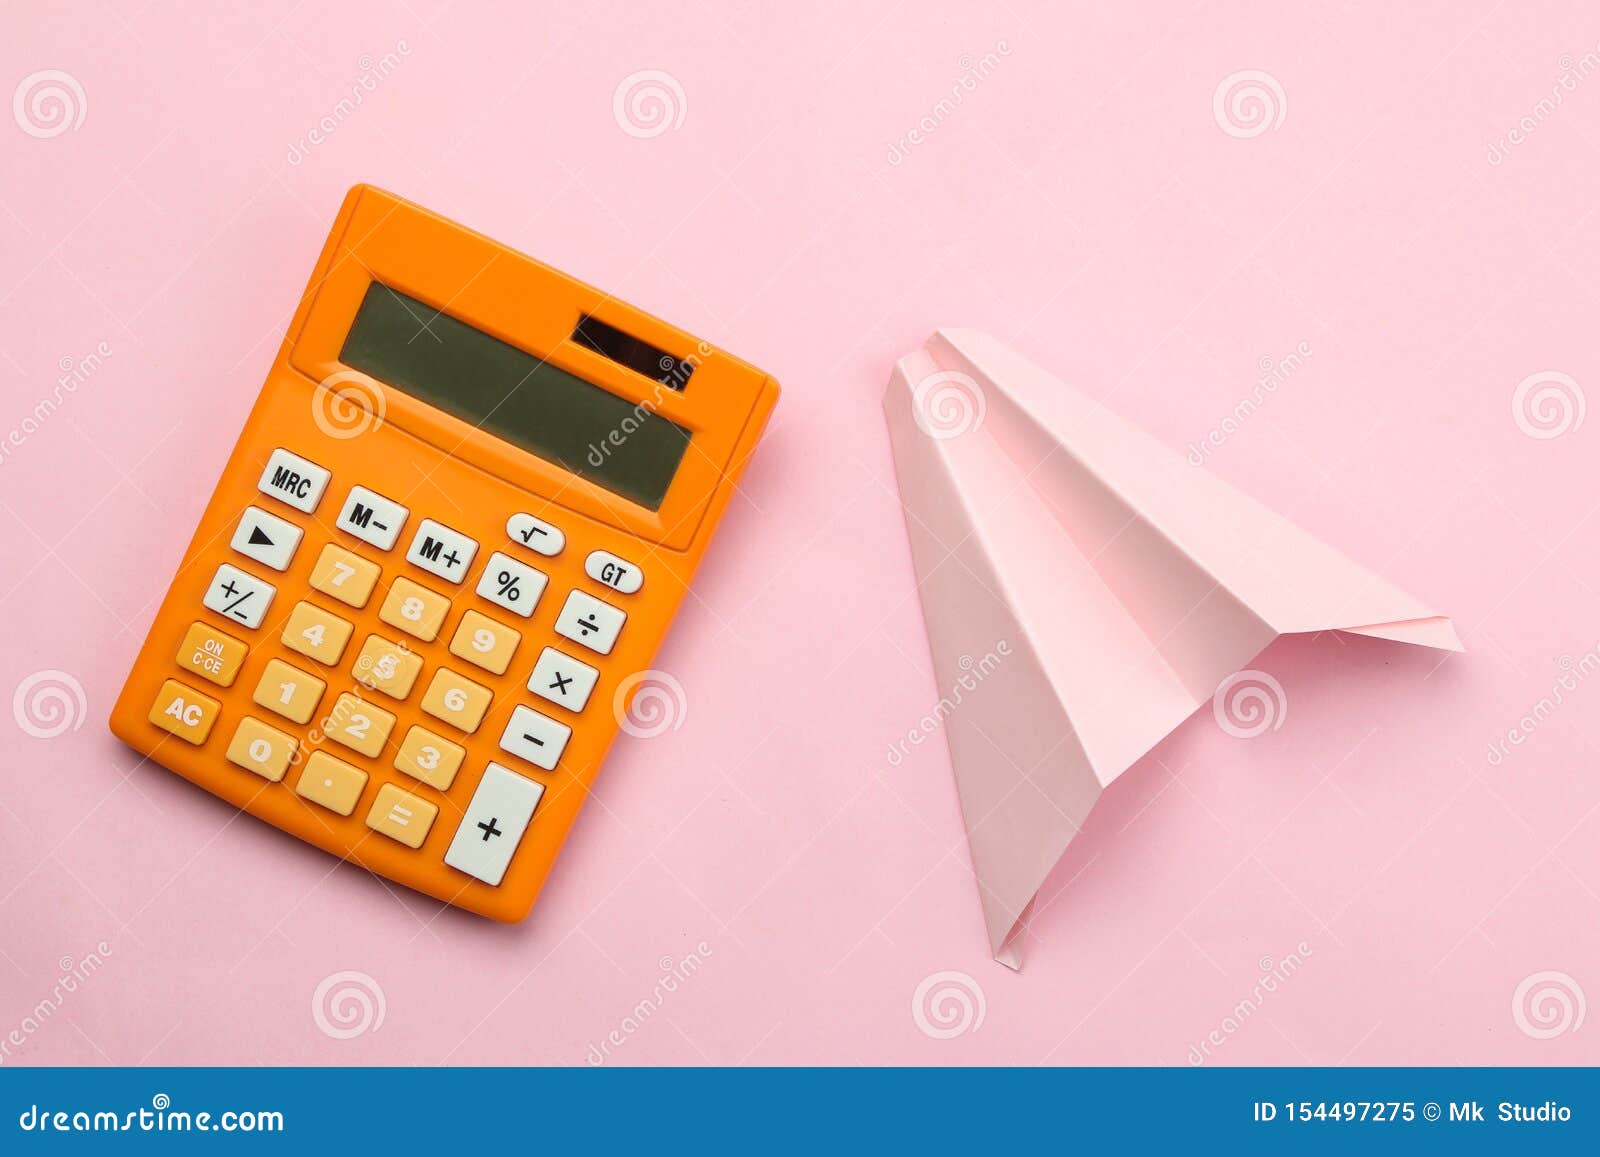 Orange Calculator And Paper Airplane On A Bright Pink Paper Background. Office Supplies